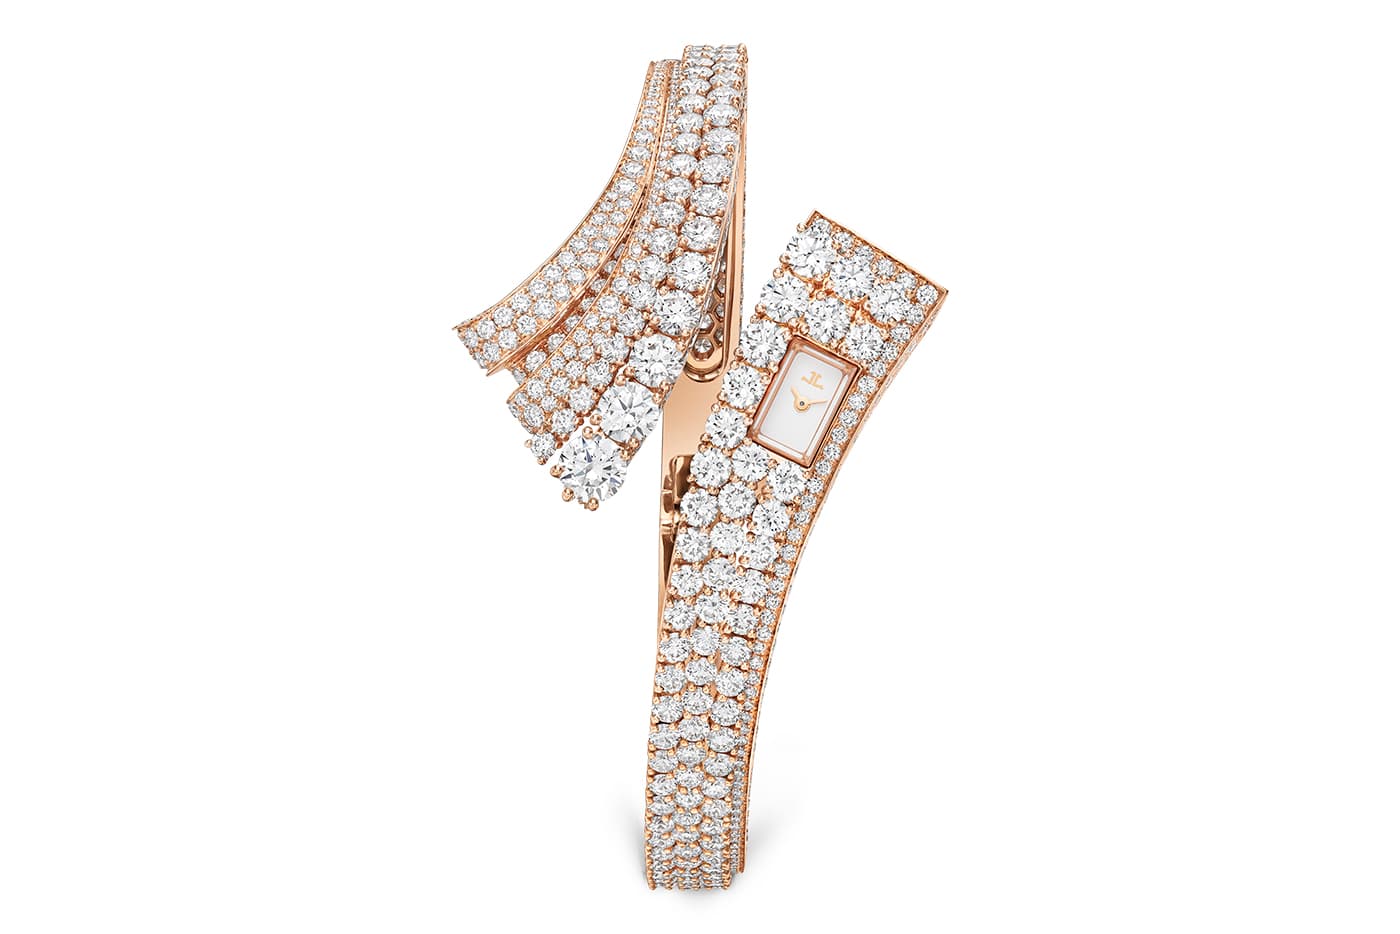 Jaeger-LeCoultre's exquisite 101 Bangle was inspired by the bold geometry of the Art Deco era